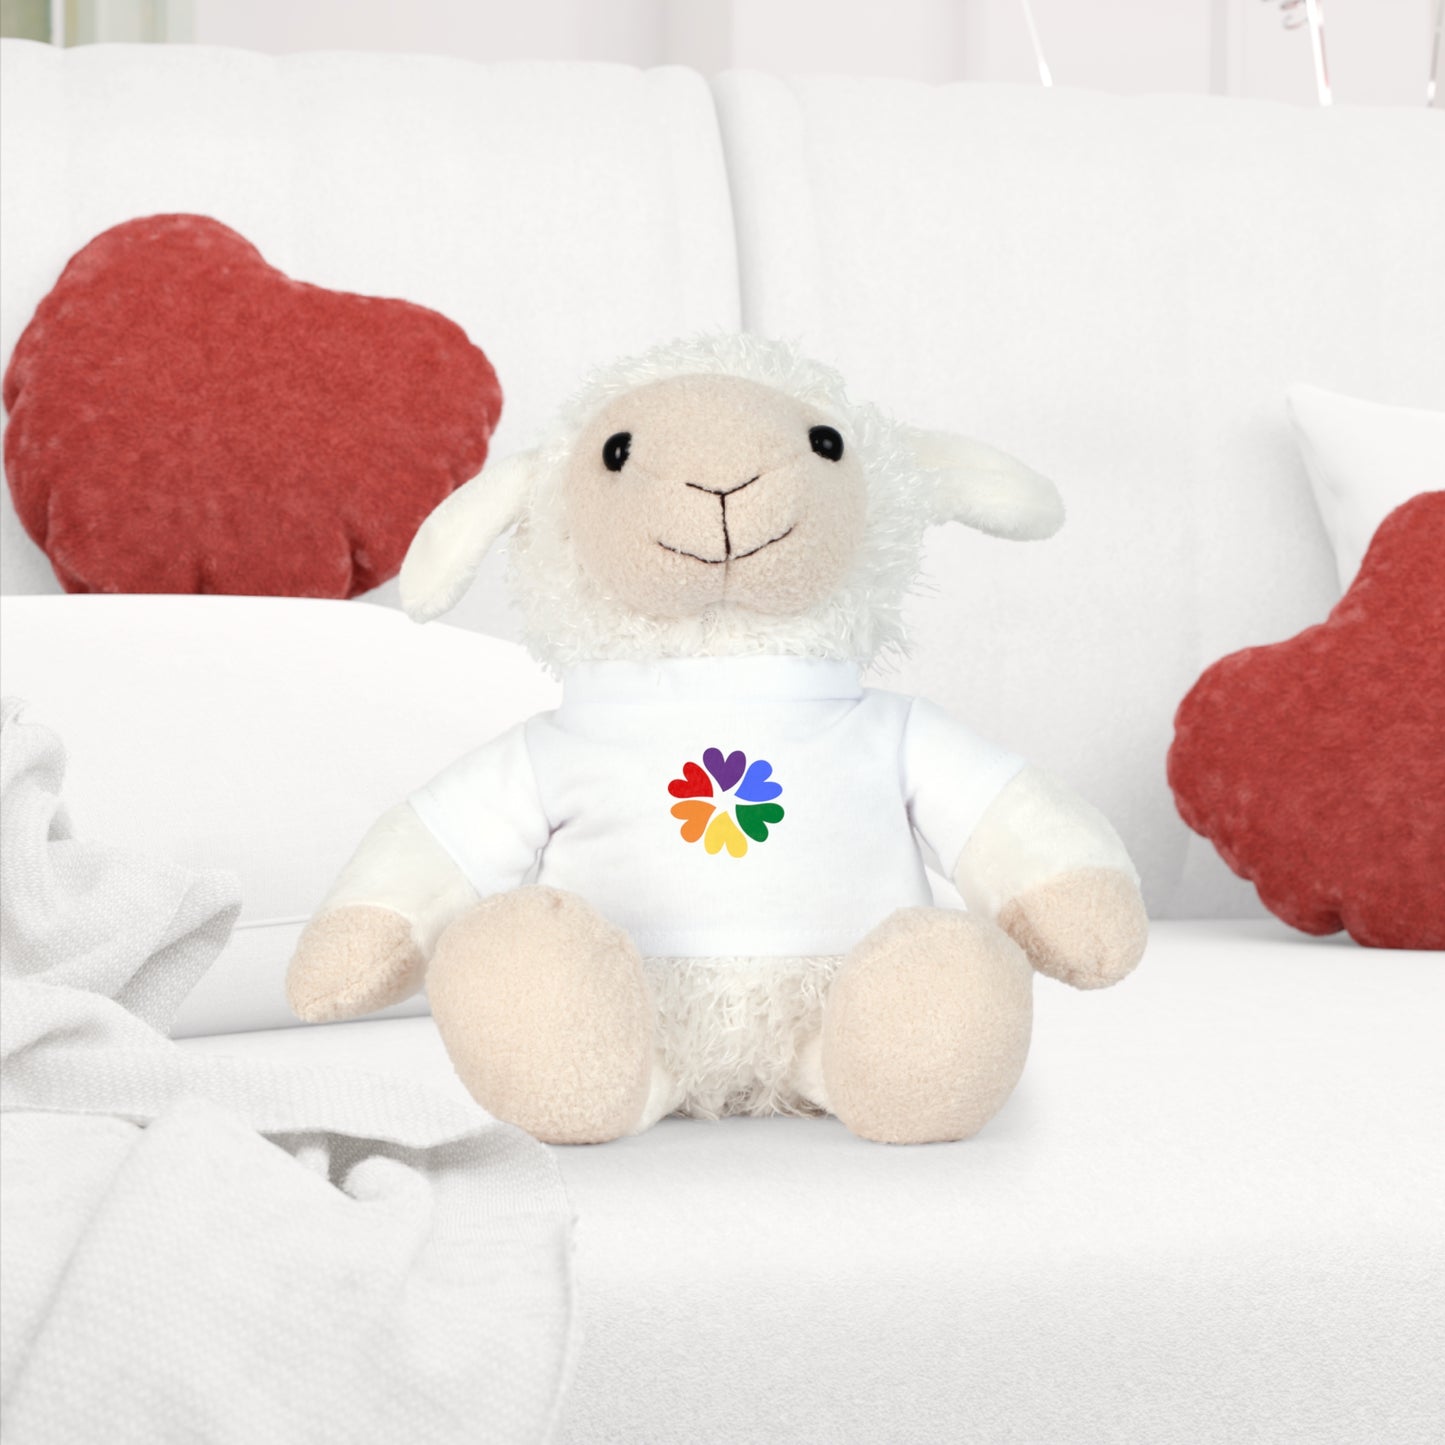 Stuffed Animal - Plush Toy with Heart Flower T-Shirt